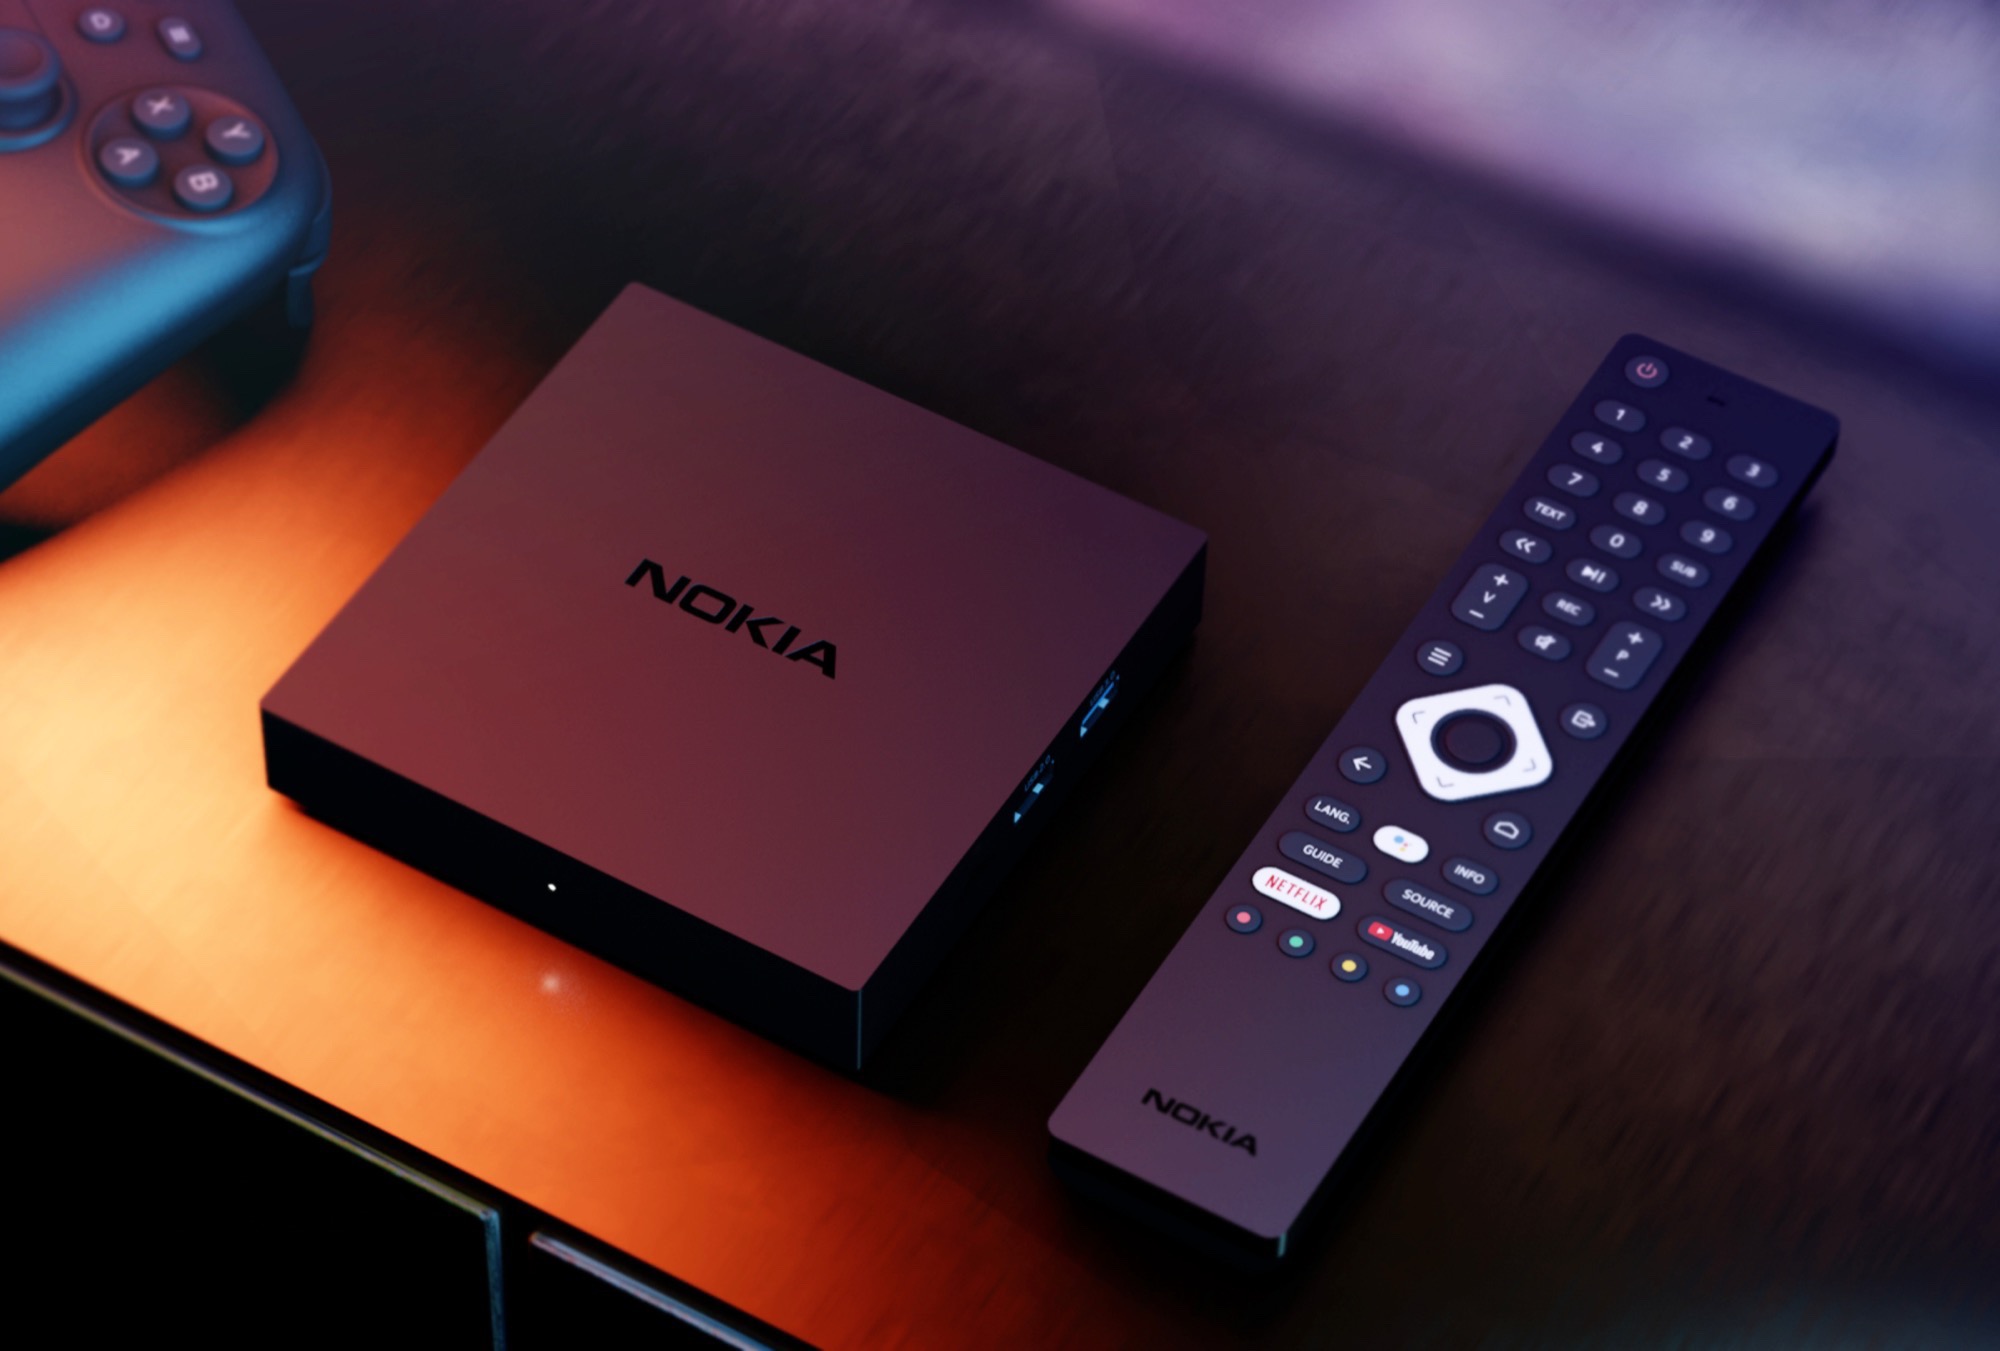 Nokia Streaming Box 8010 specifications